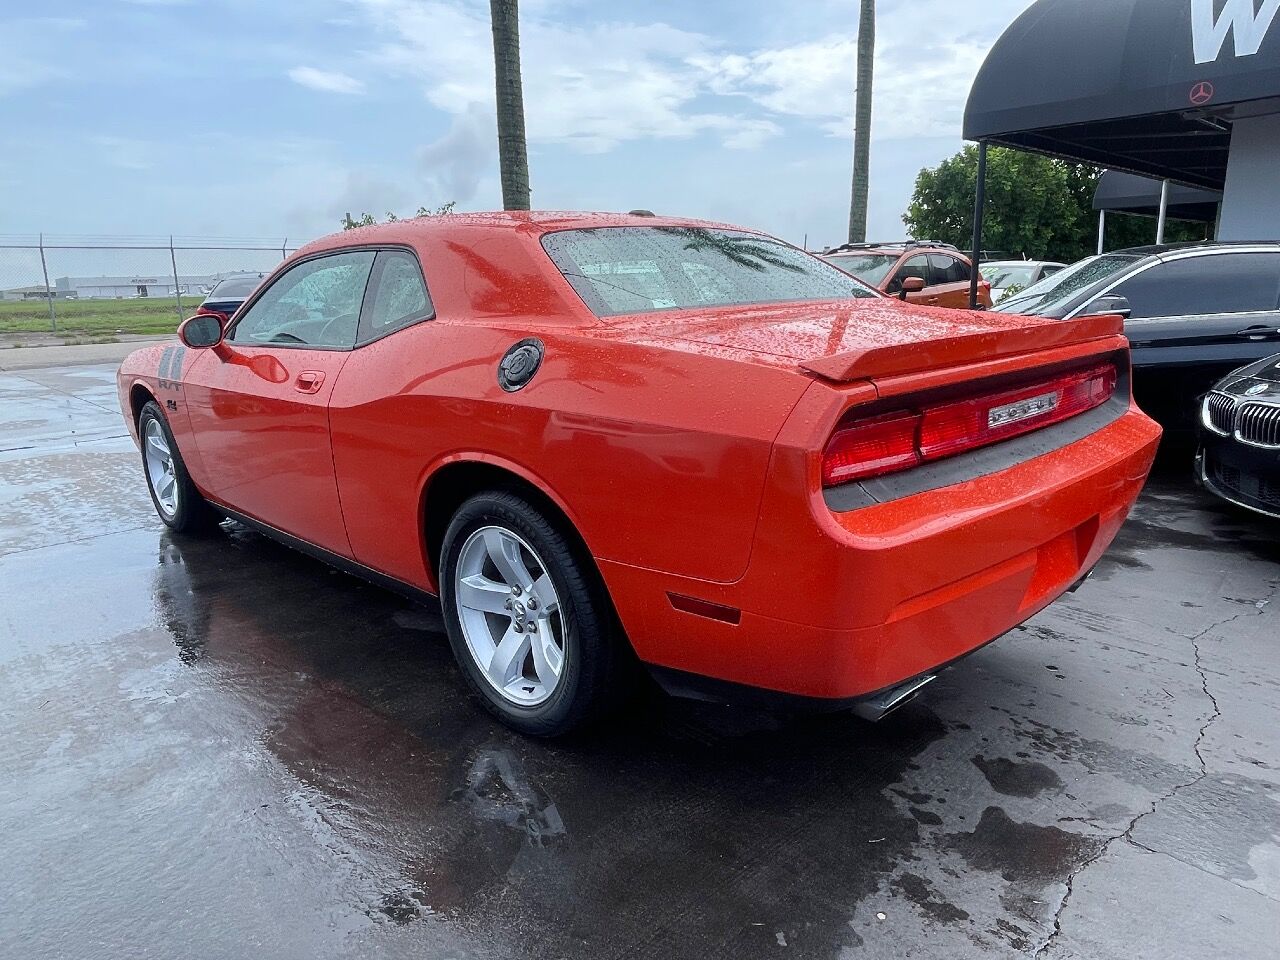 2010 DODGE Challenger Coupe - $16,900